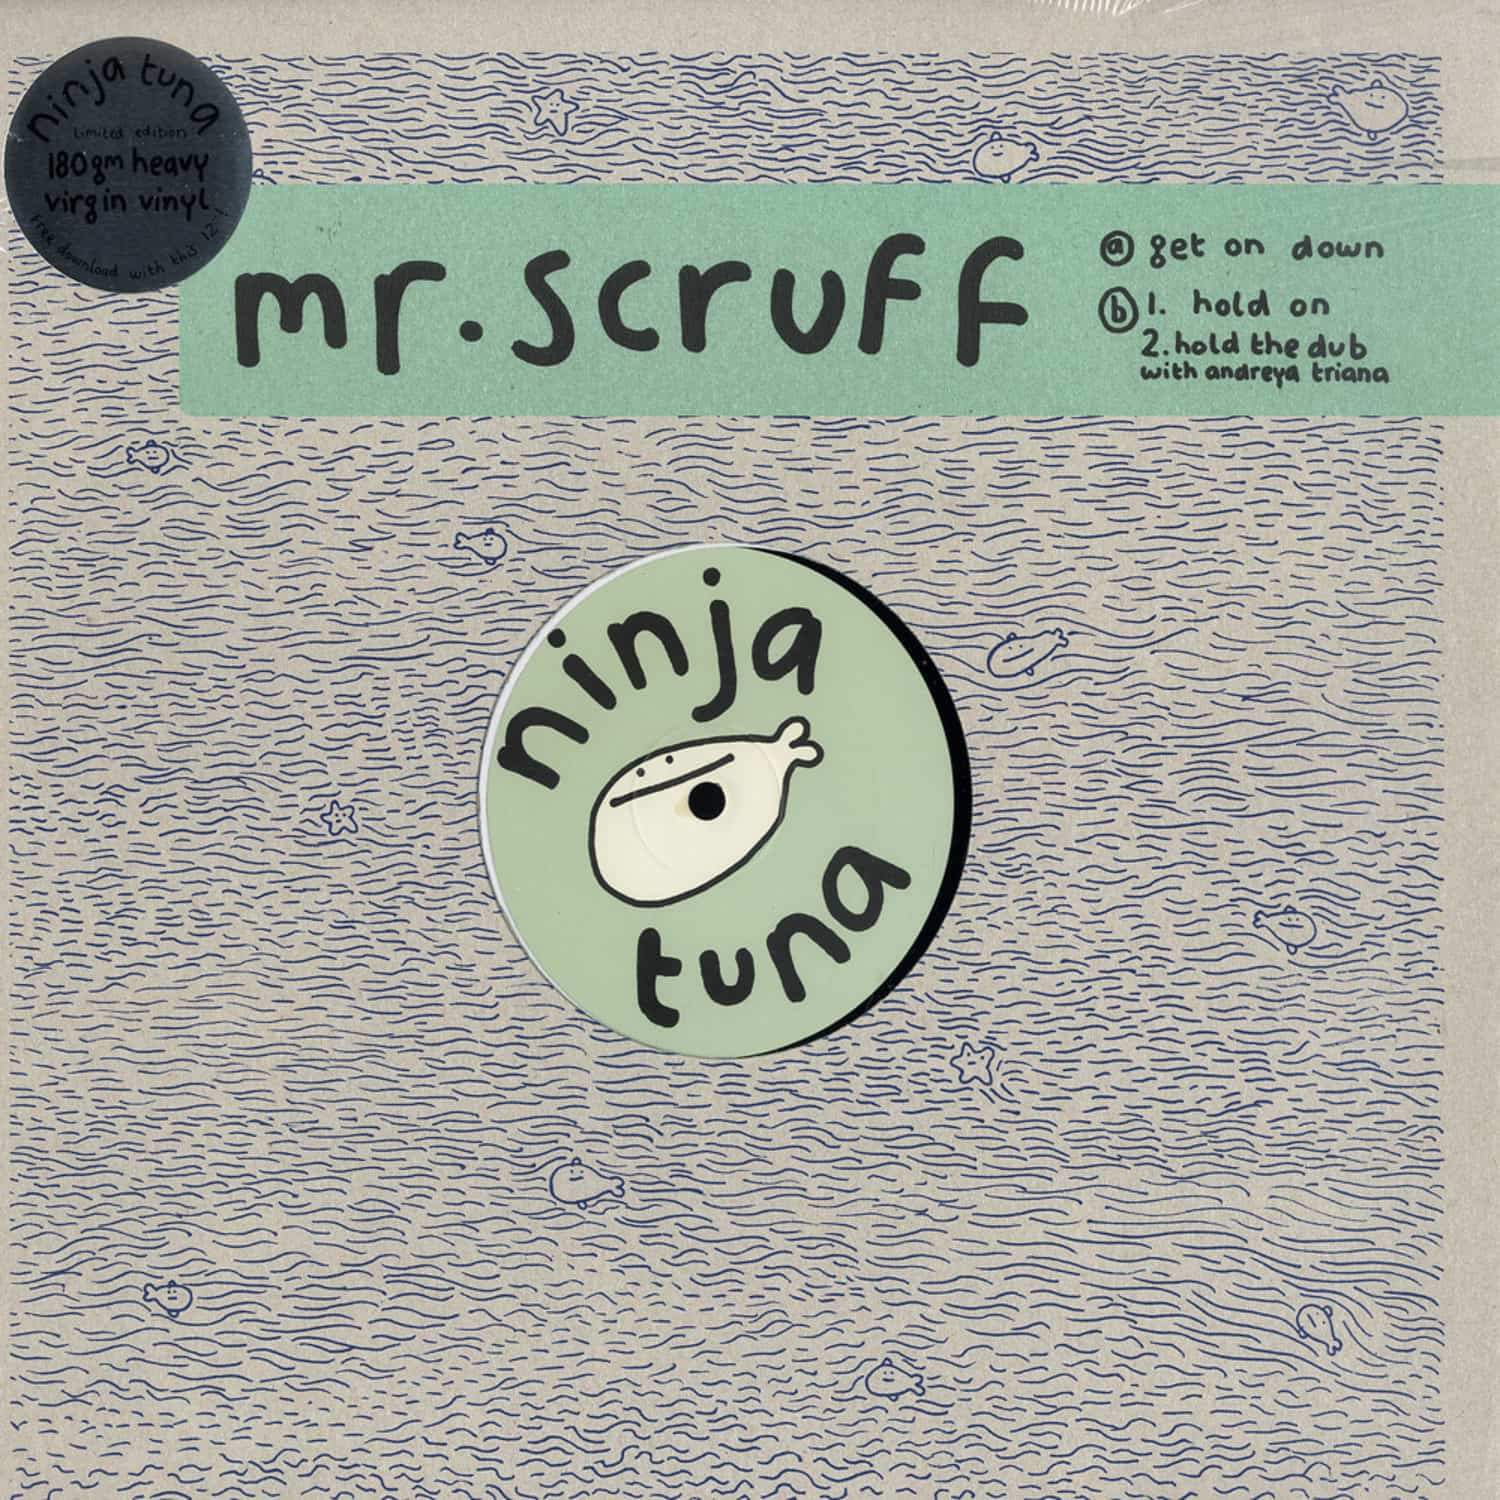 Mr. Sruff - HOLD ON / GET ON DOWN